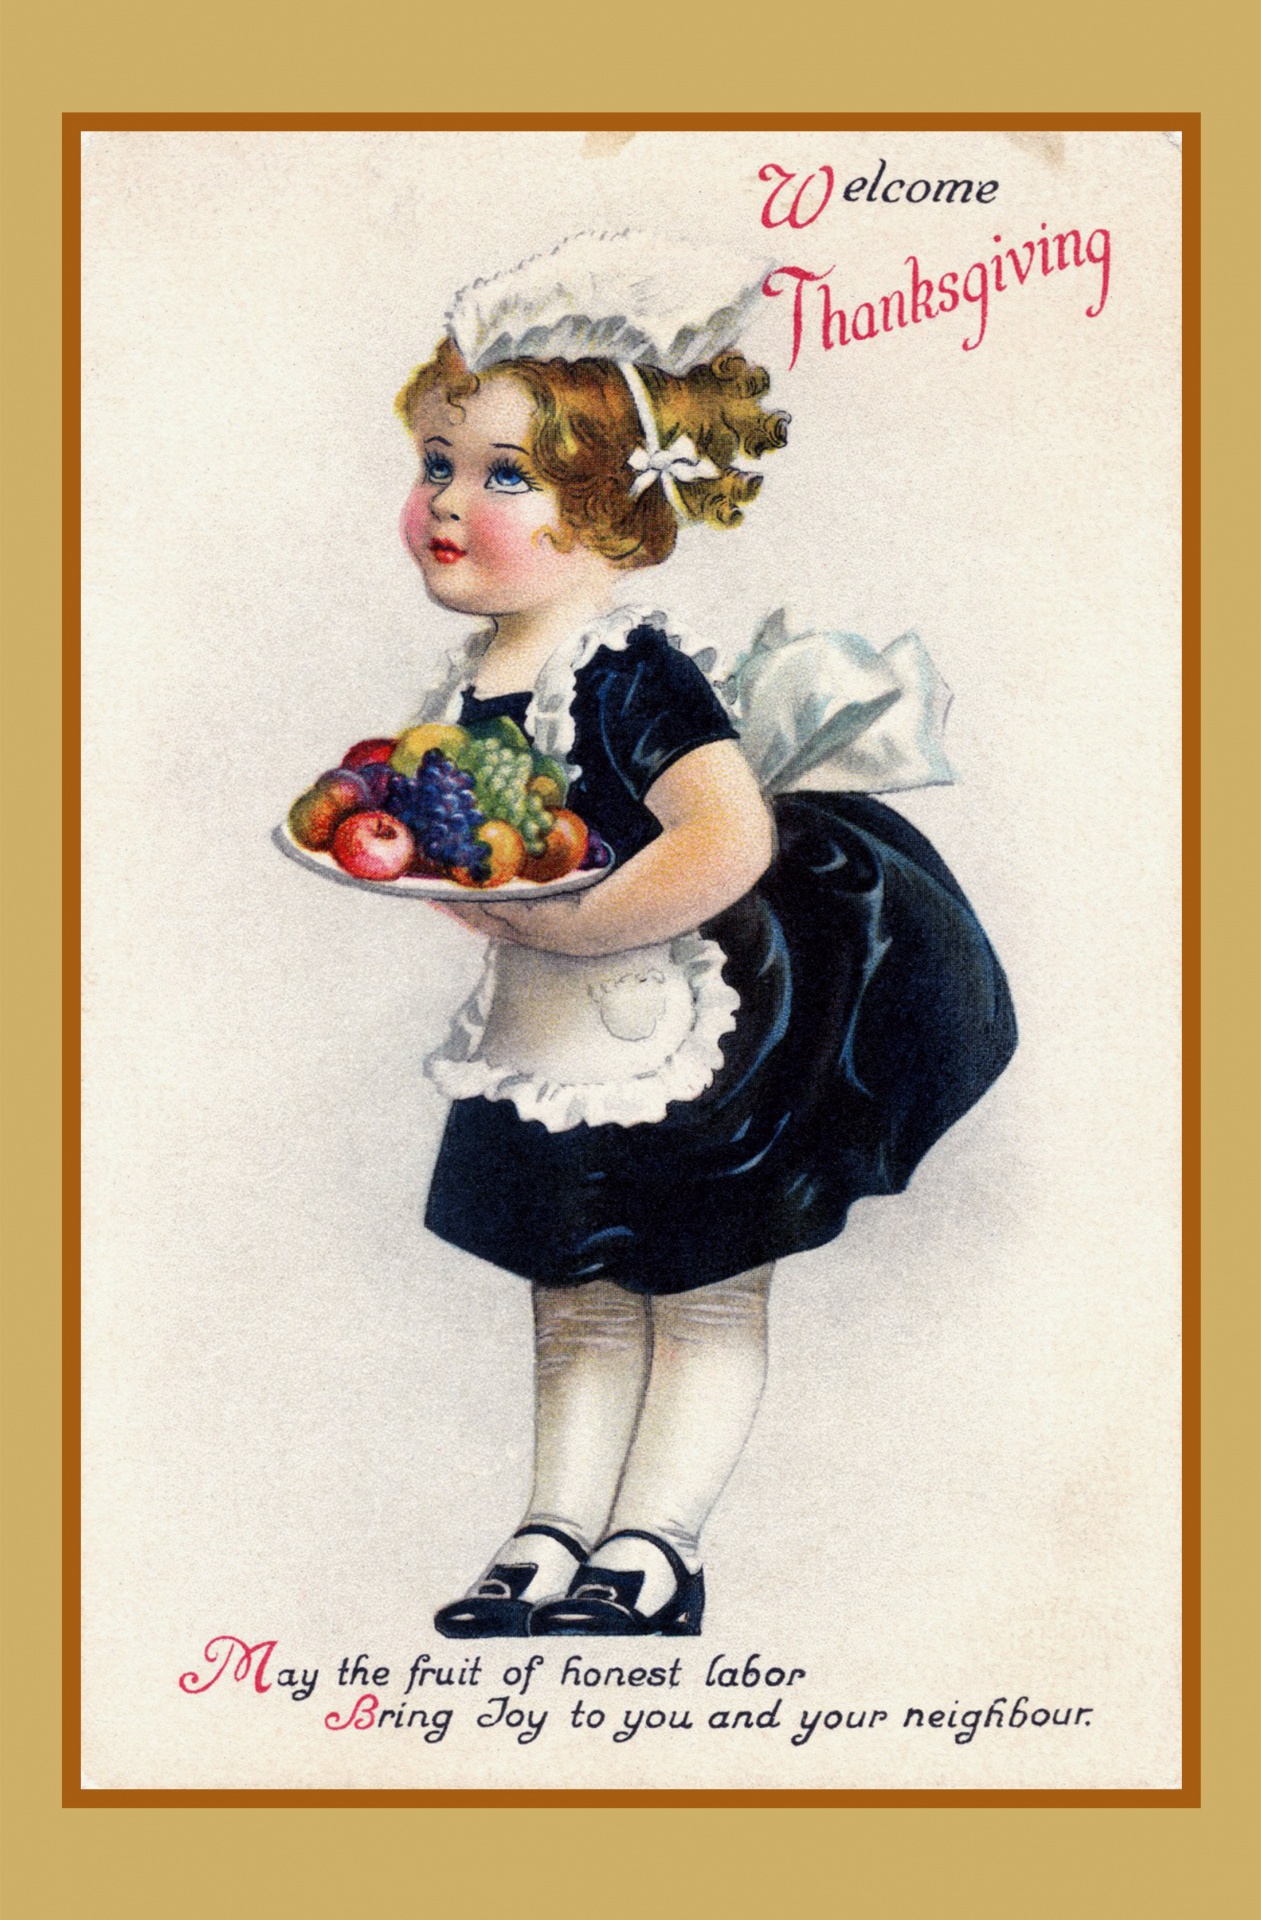 Vintage thanksgiving day card with little girl and bowl fruit